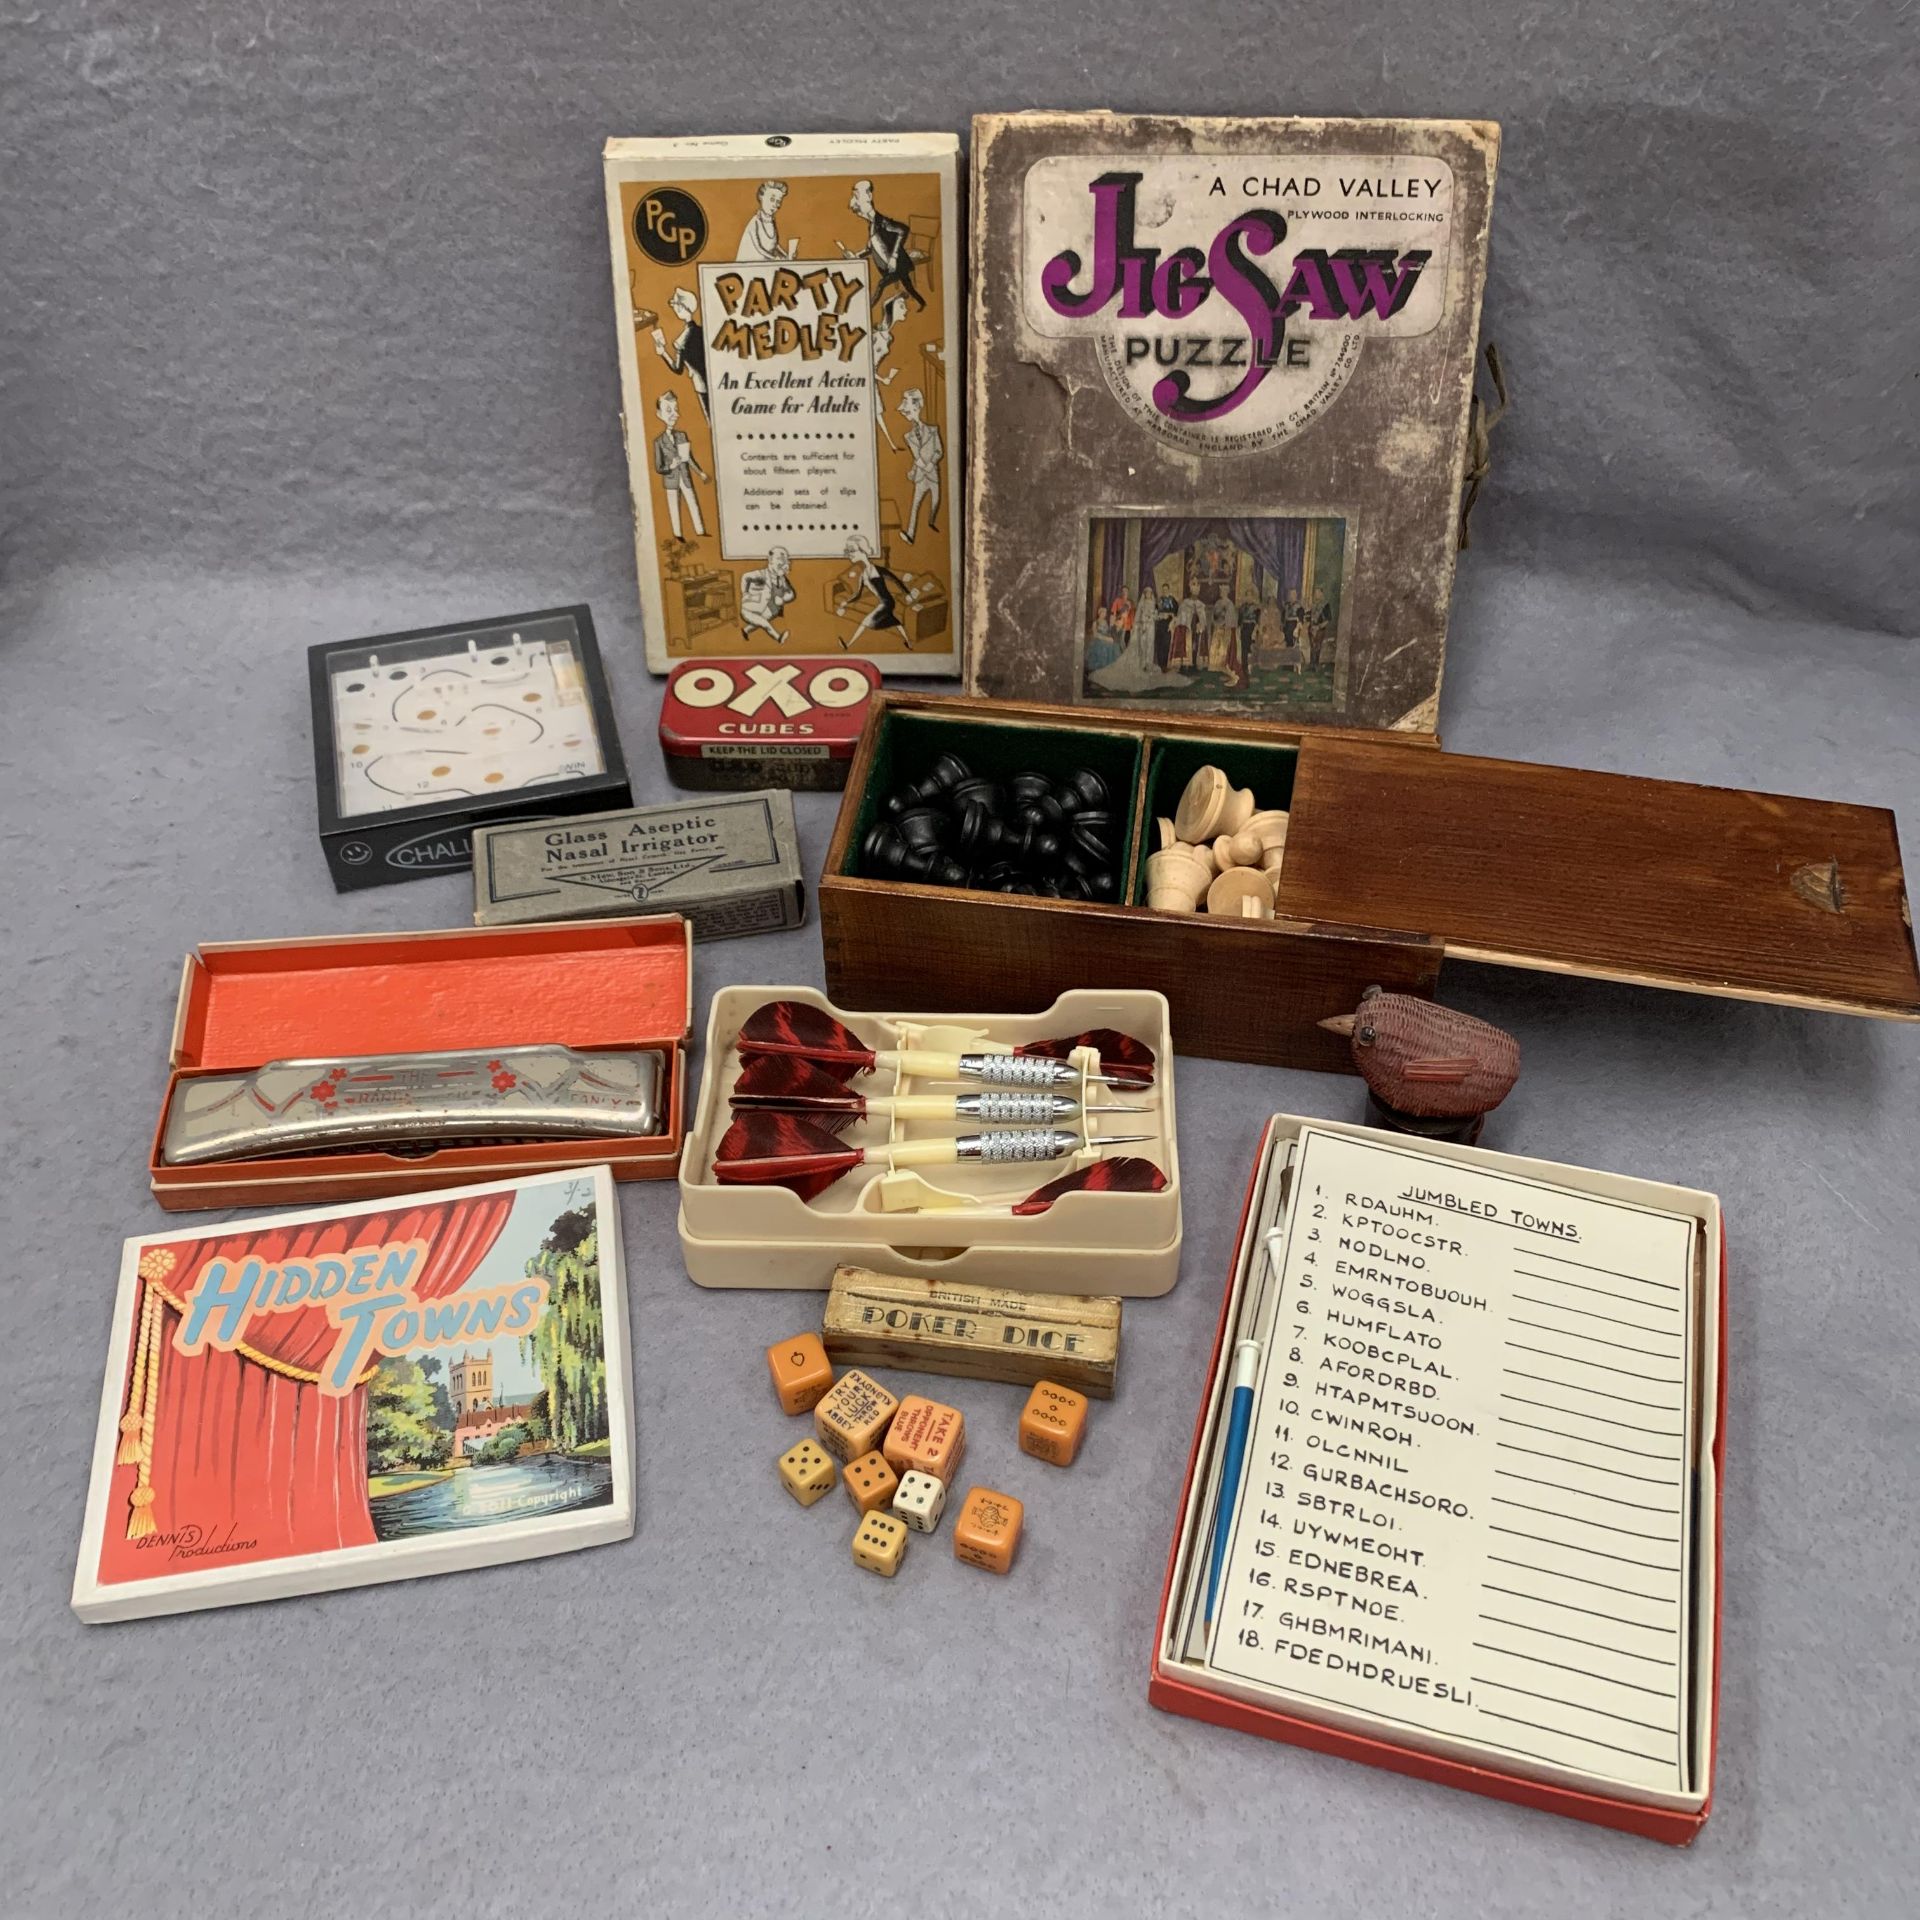 Contents to tray a Chad Valley plywood interlocking jigsaw puzzle, chess set,